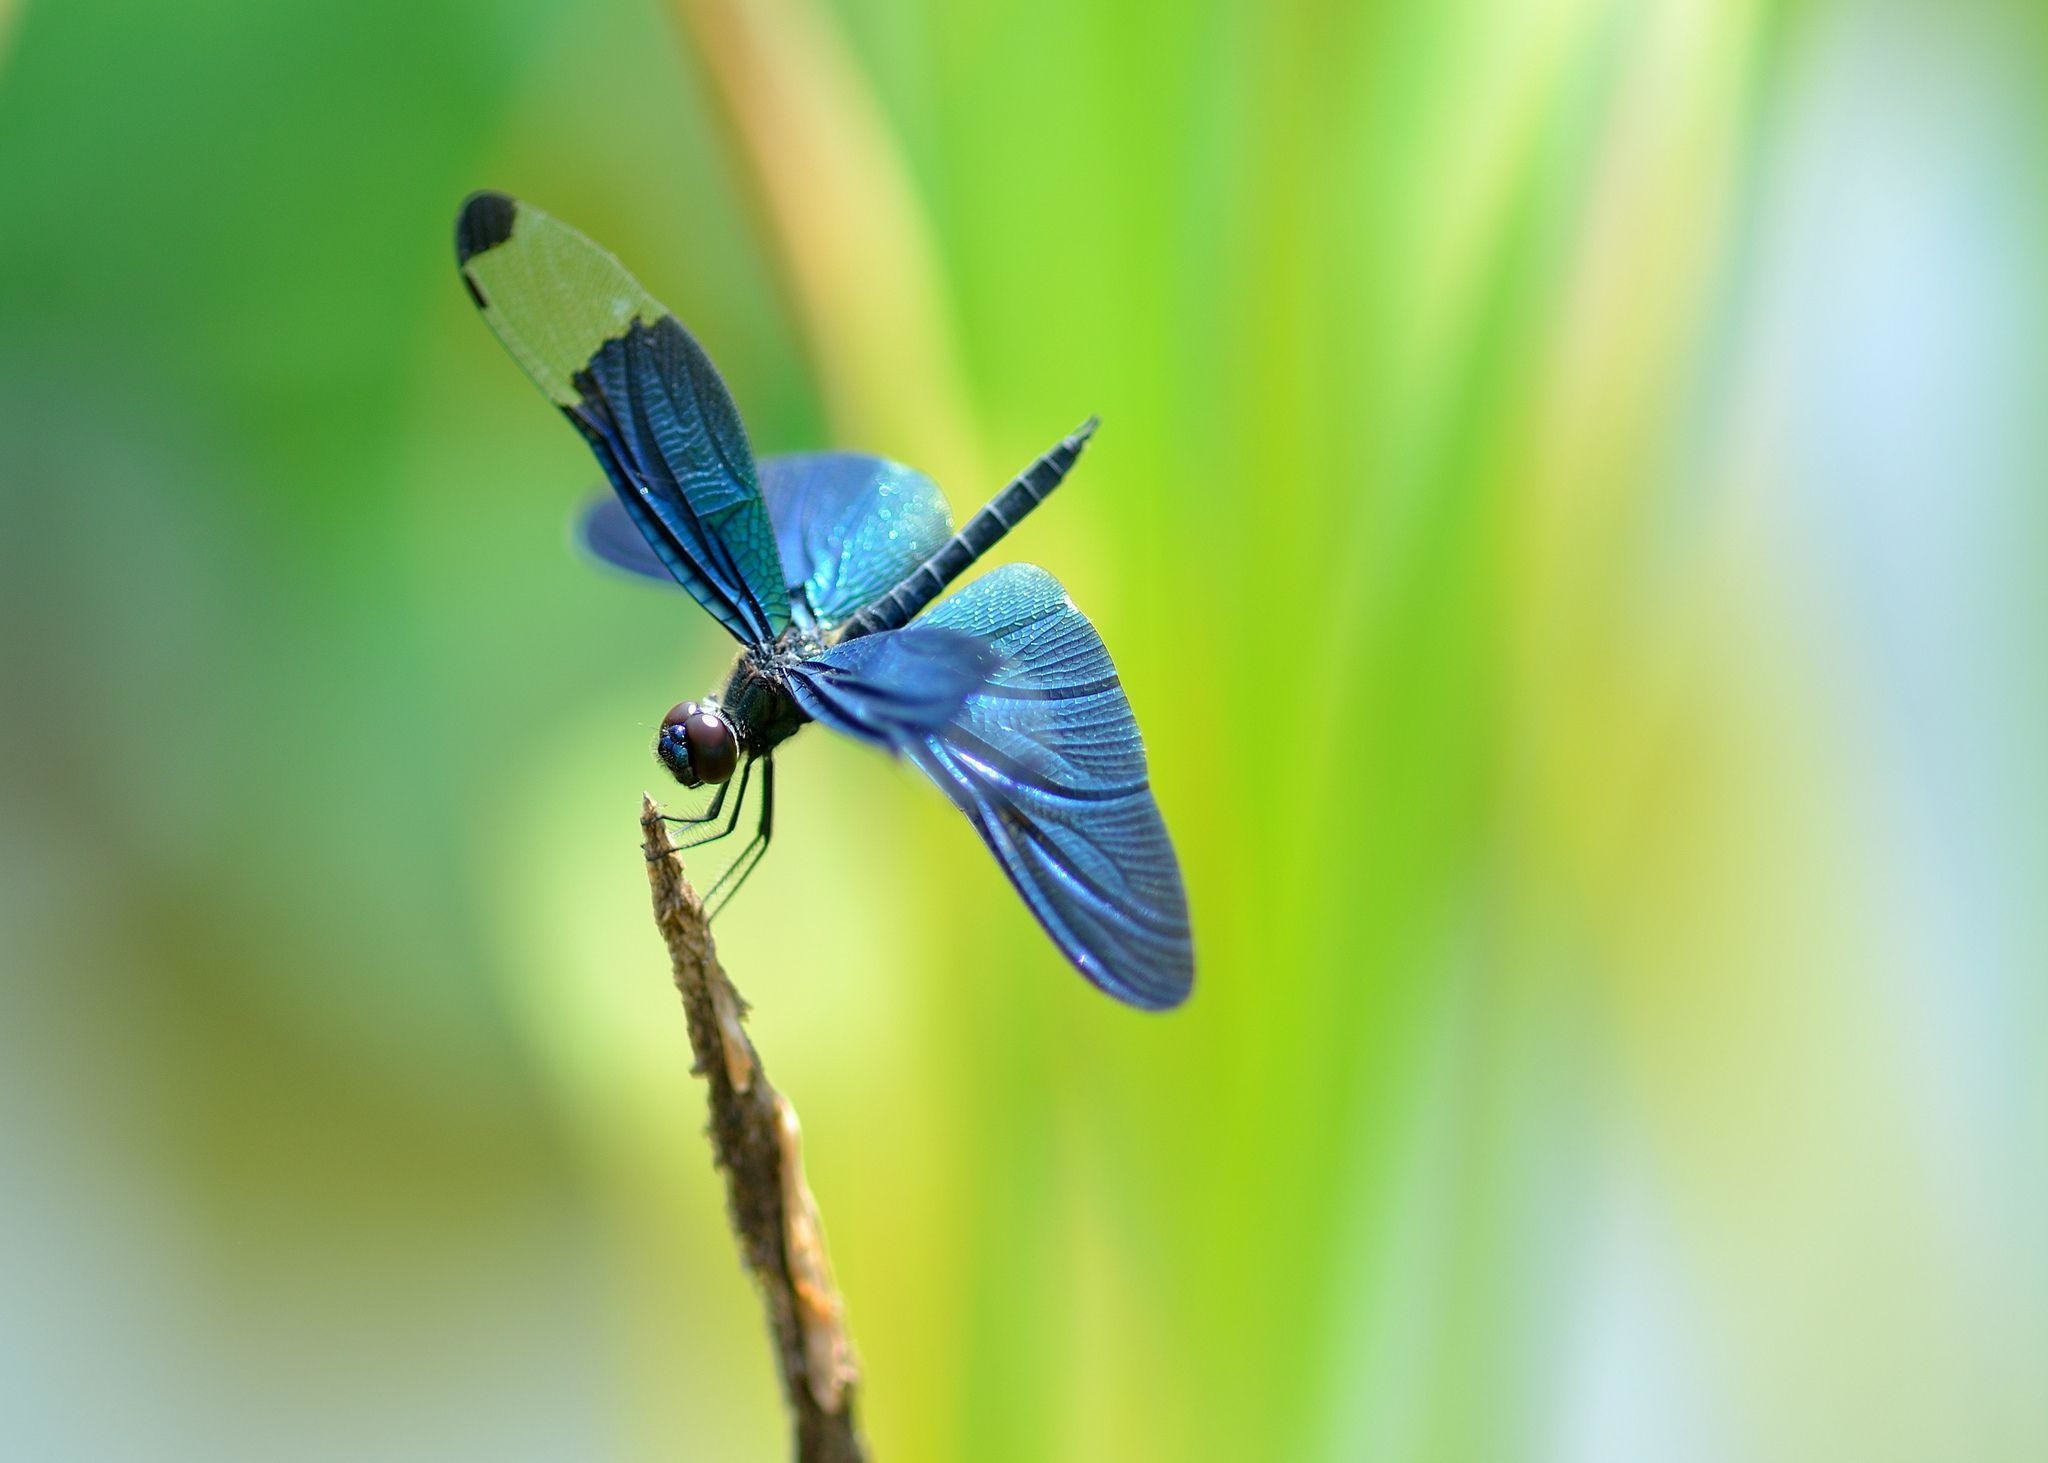 2048x1463 Blue Dragonfly Wallpaper For Android #3707 Wallpaper | Wallpaper .